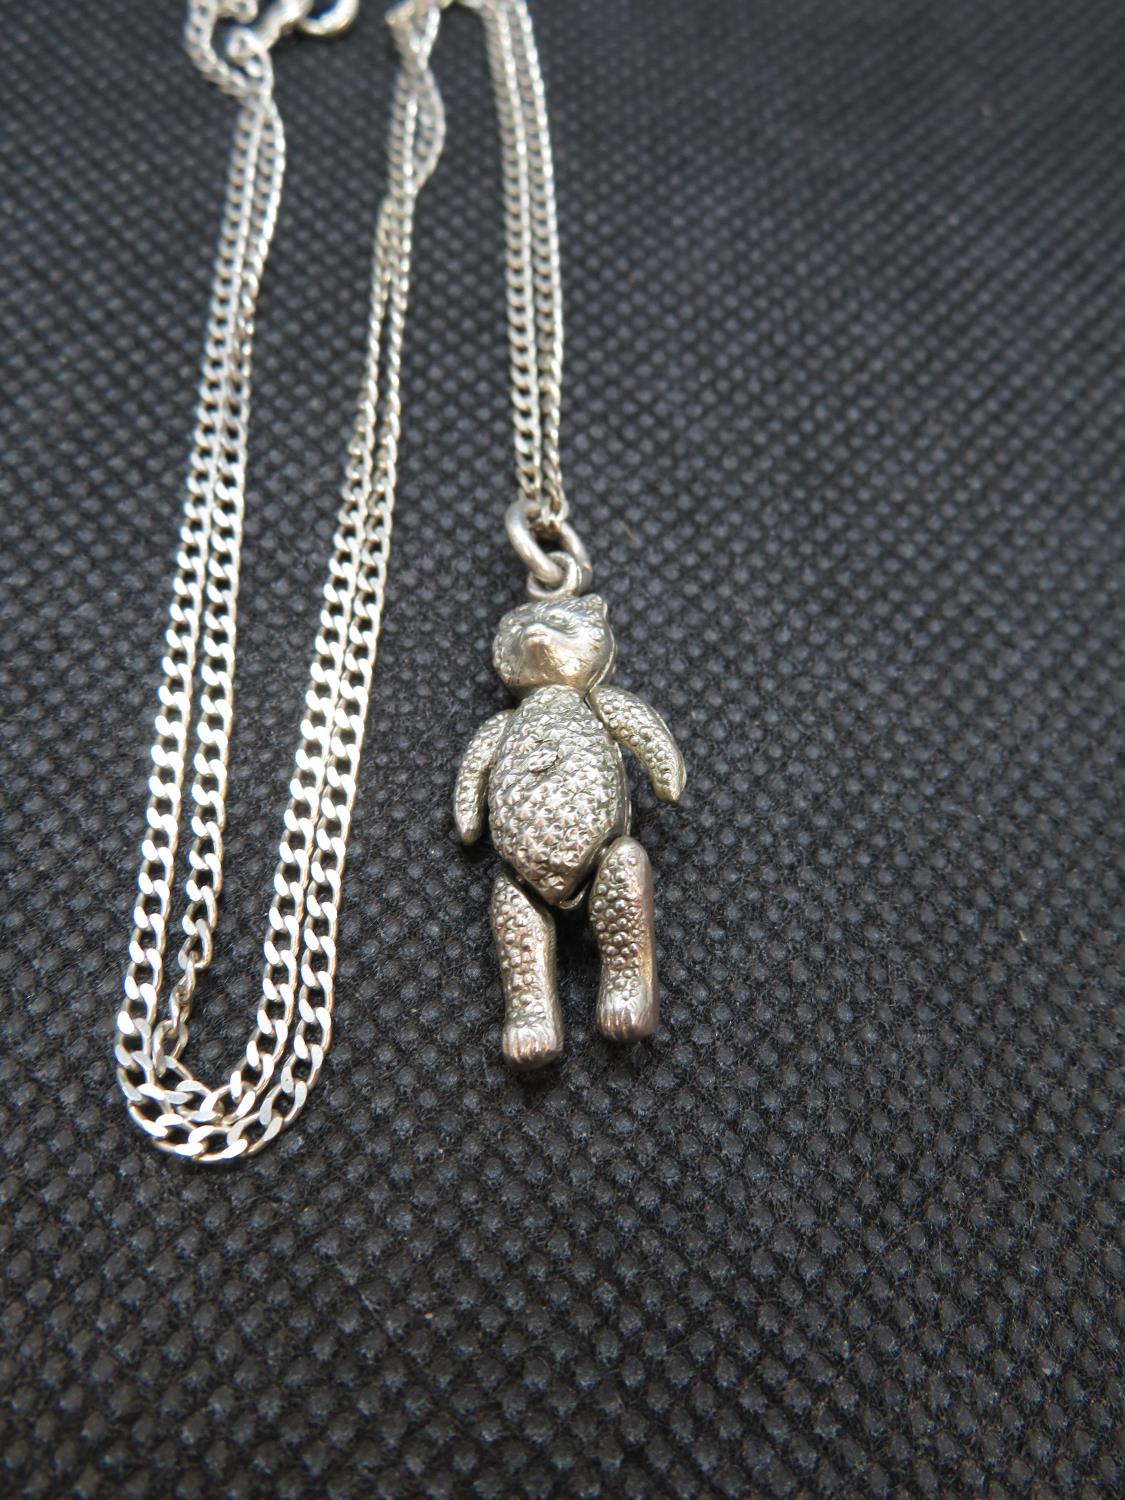 vintage silver articulated Teddy Bear pendant on 18" silver chain 5g - Image 2 of 3